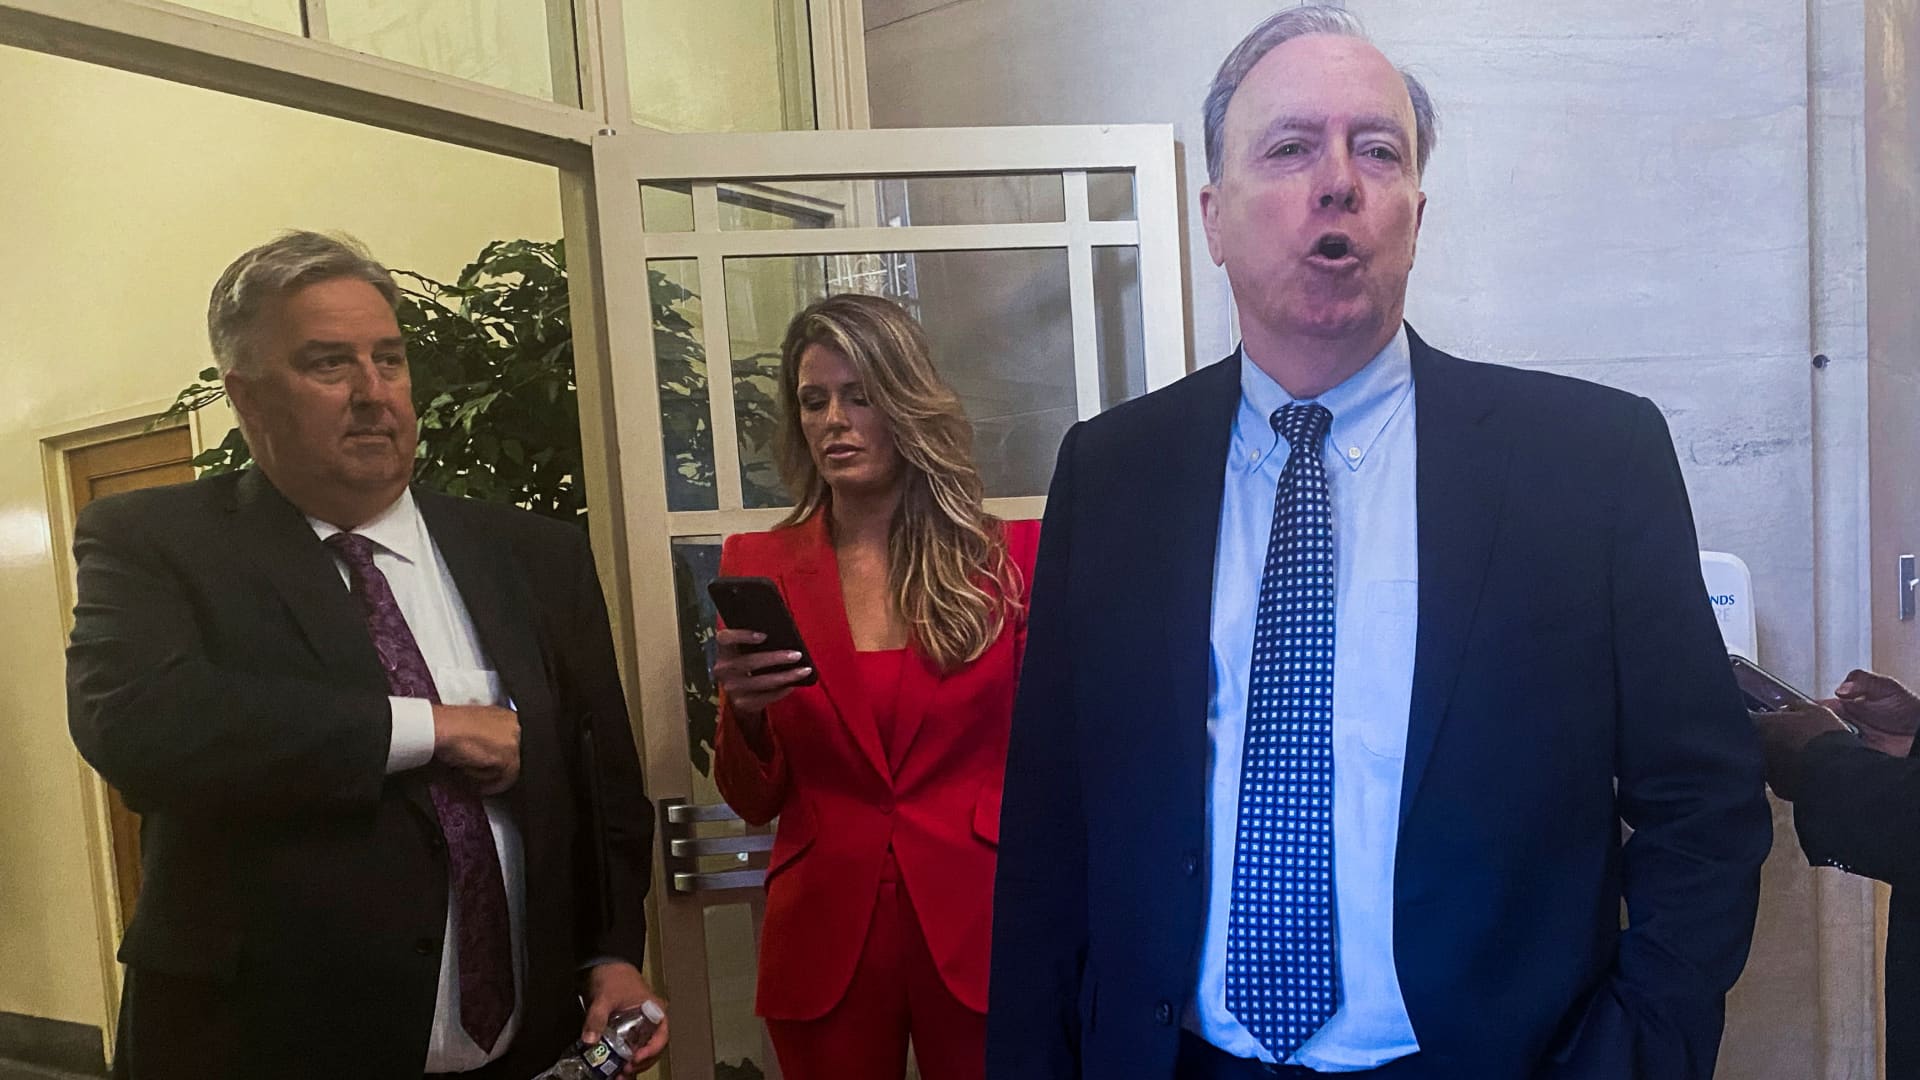 Attorneys for former U.S. President Donald Trump; James Trusty, Lindsey Halligan and John Rowley, depart the U.S. Justice Department after meeting with Justice Department officials over the Trump Mar-a-Lago classified documents case, after Trump's lawyers last month sent the department a letter asking for a meeting with U.S. Attorney General Merrick Garland, in Washington, U.S. June 5, 2023. 